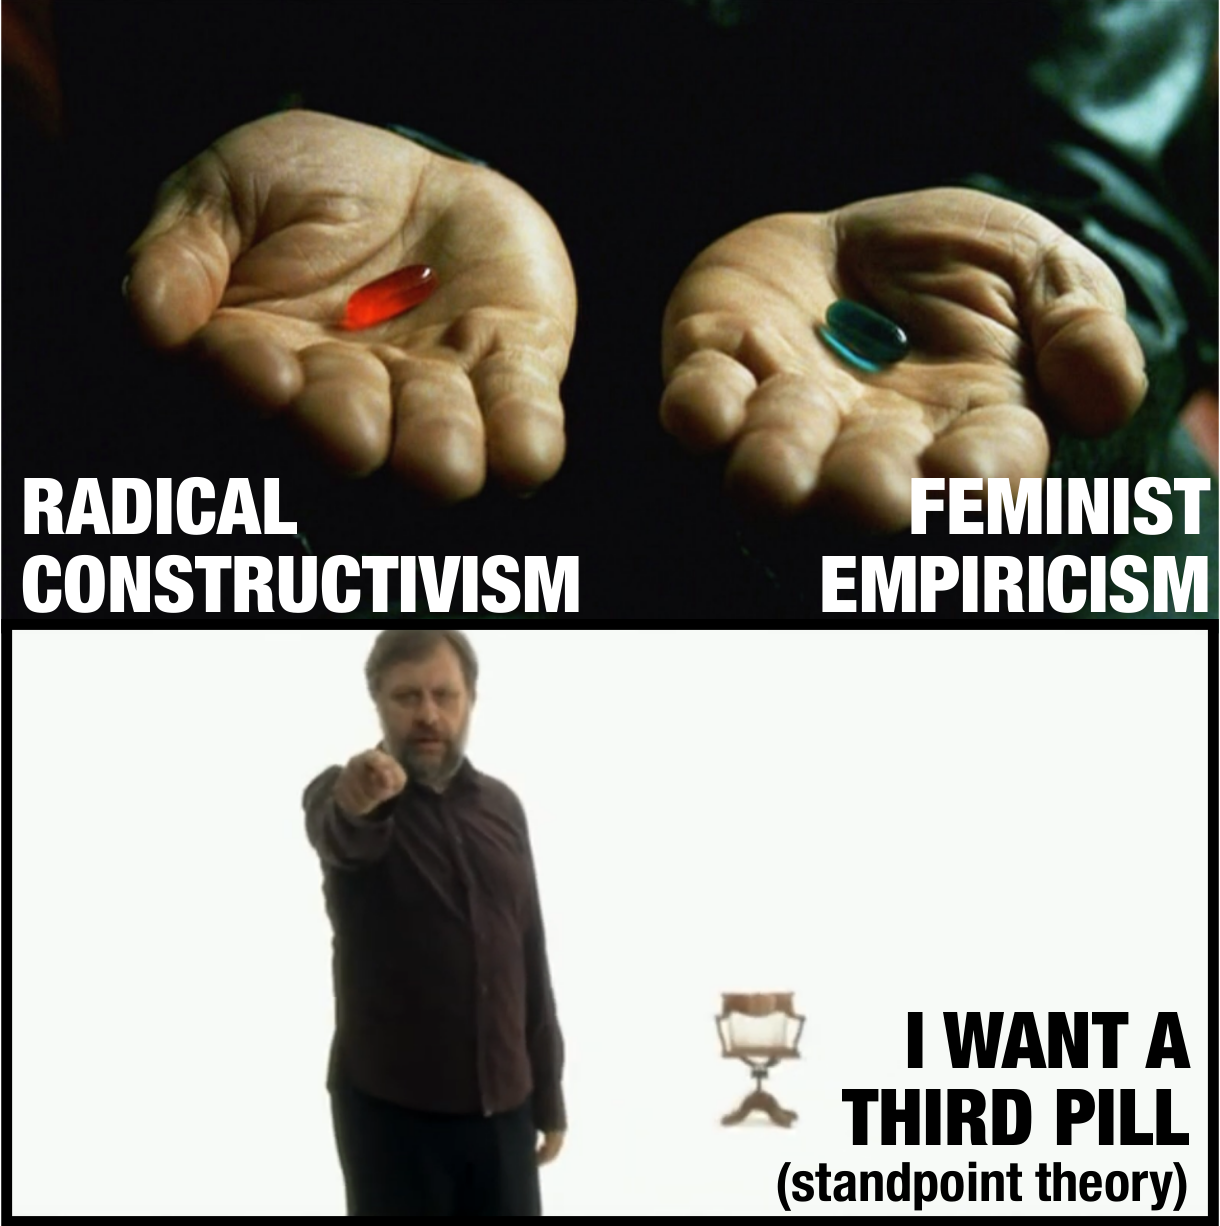 Top panel: two hands outstretched, one offering a red pill and the other offering a blue pill. The red pill is labeled 'radical constructivism' and the blue pill is labeled 'feminist empiricsm.' Bottom panel: a man (Zizek) standing in front of a chair with a completely white background, pointing at the camera. This panel is labeled 'I want a third pill (standpoint theory)'